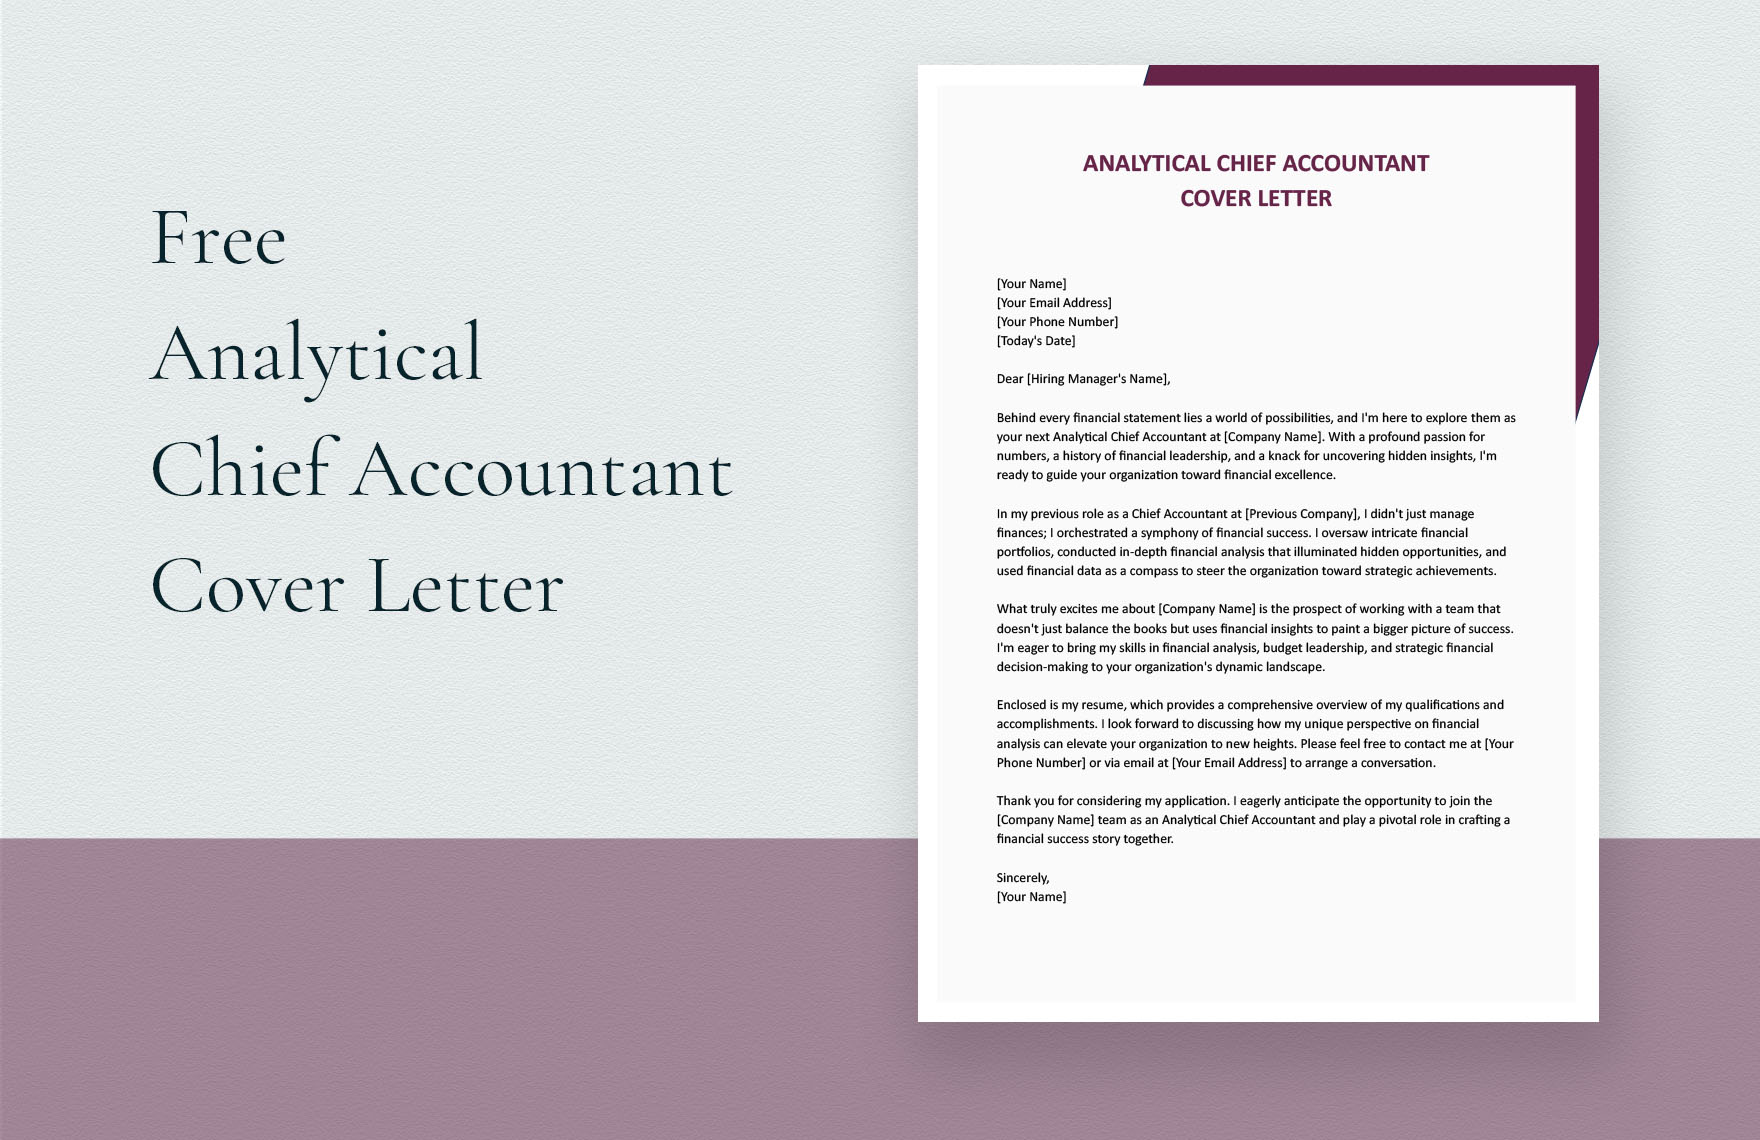 Analytical Chief Accountant Cover Letter